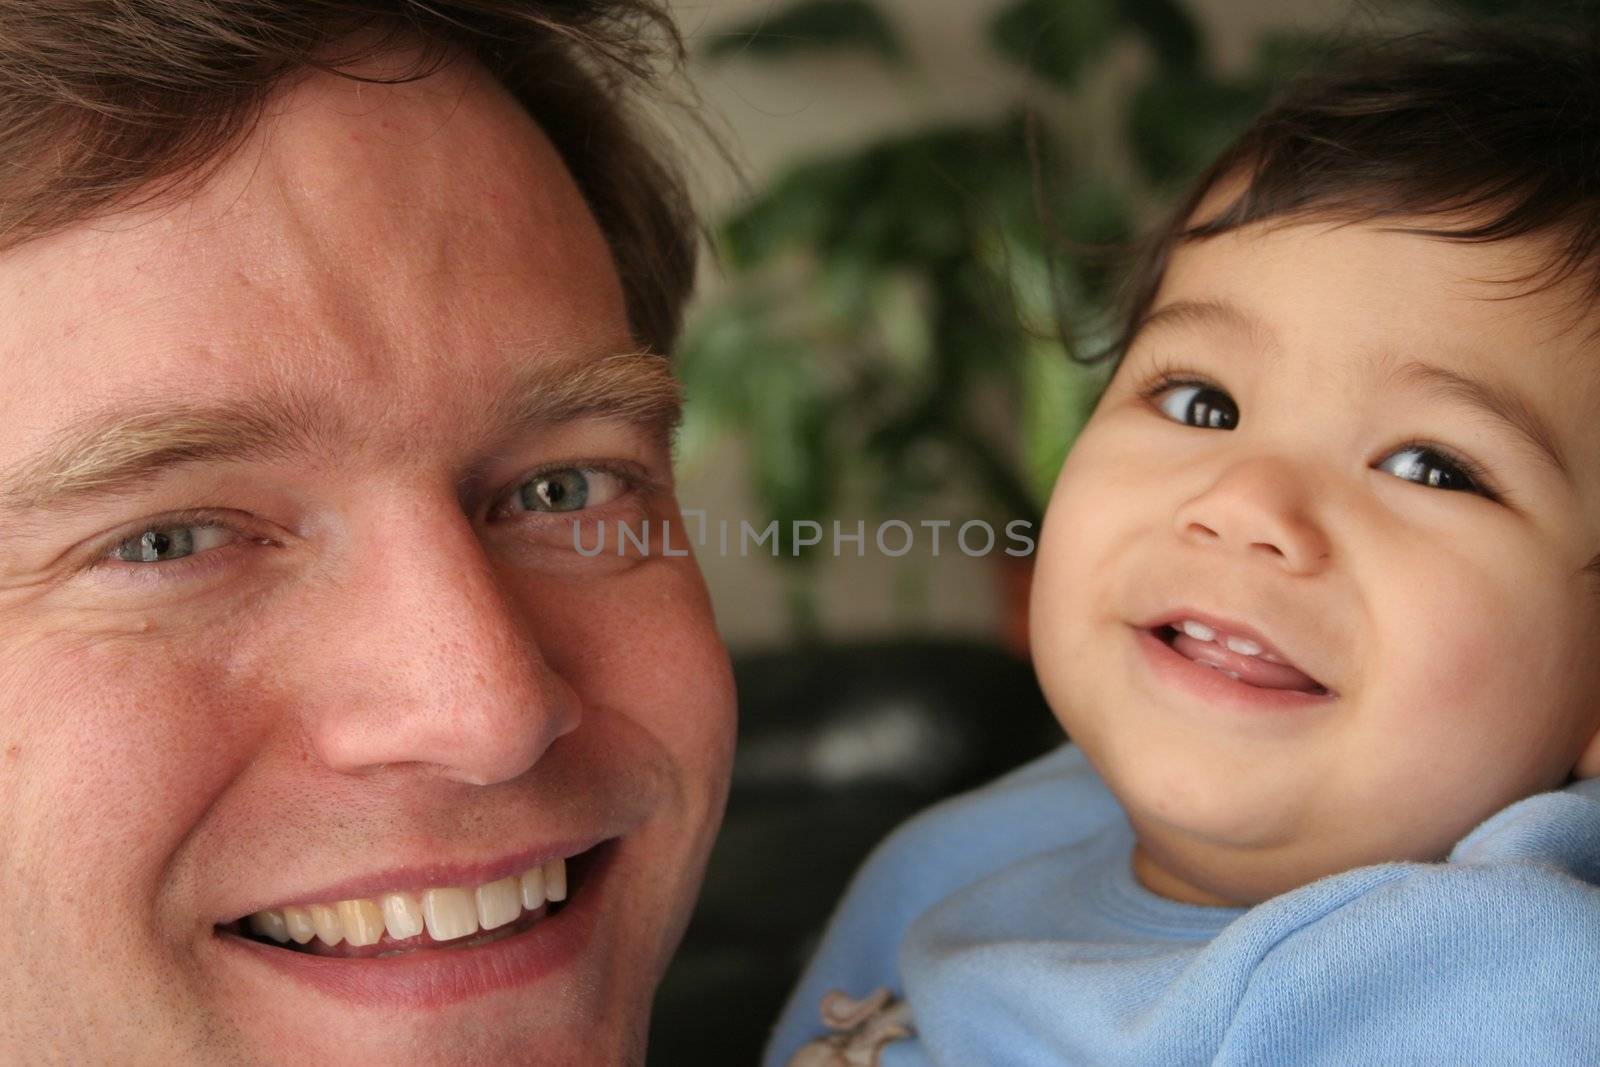 Smiling father and baby by jarenwicklund